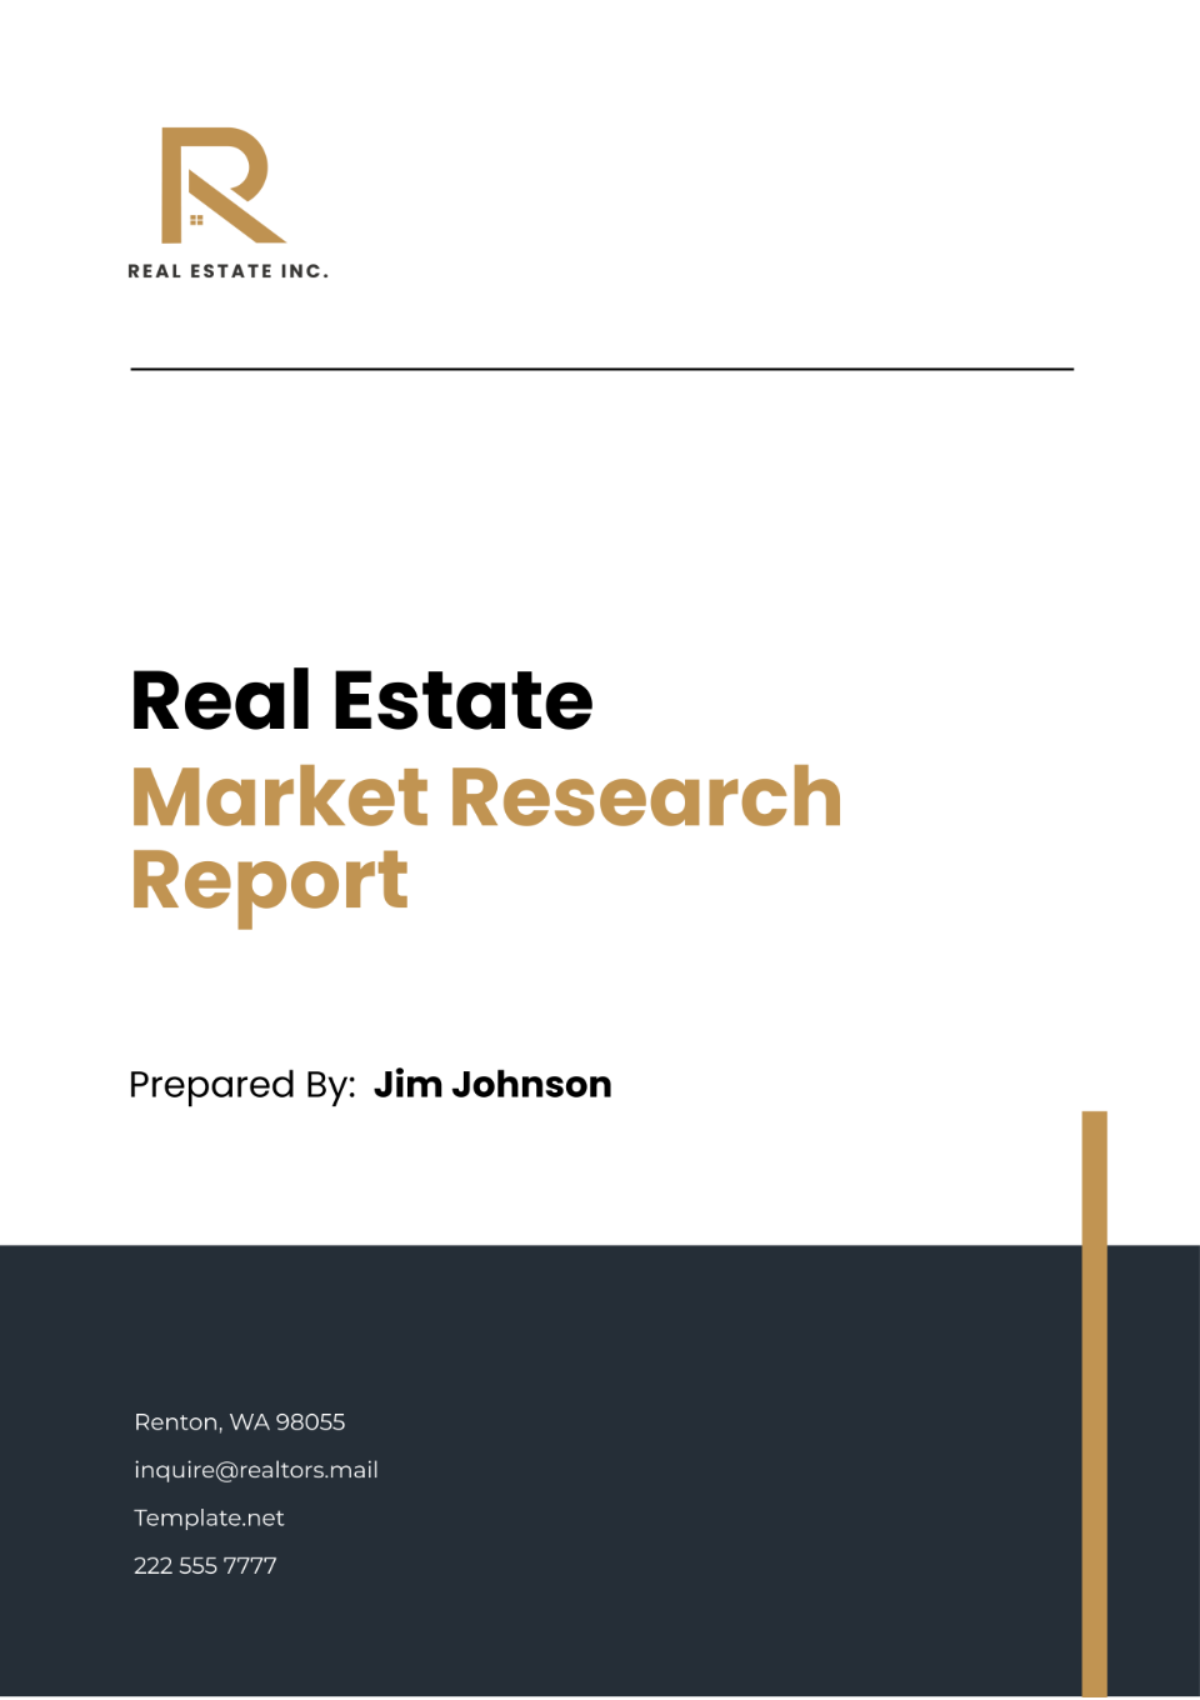 Real Estate Market Research Report Template